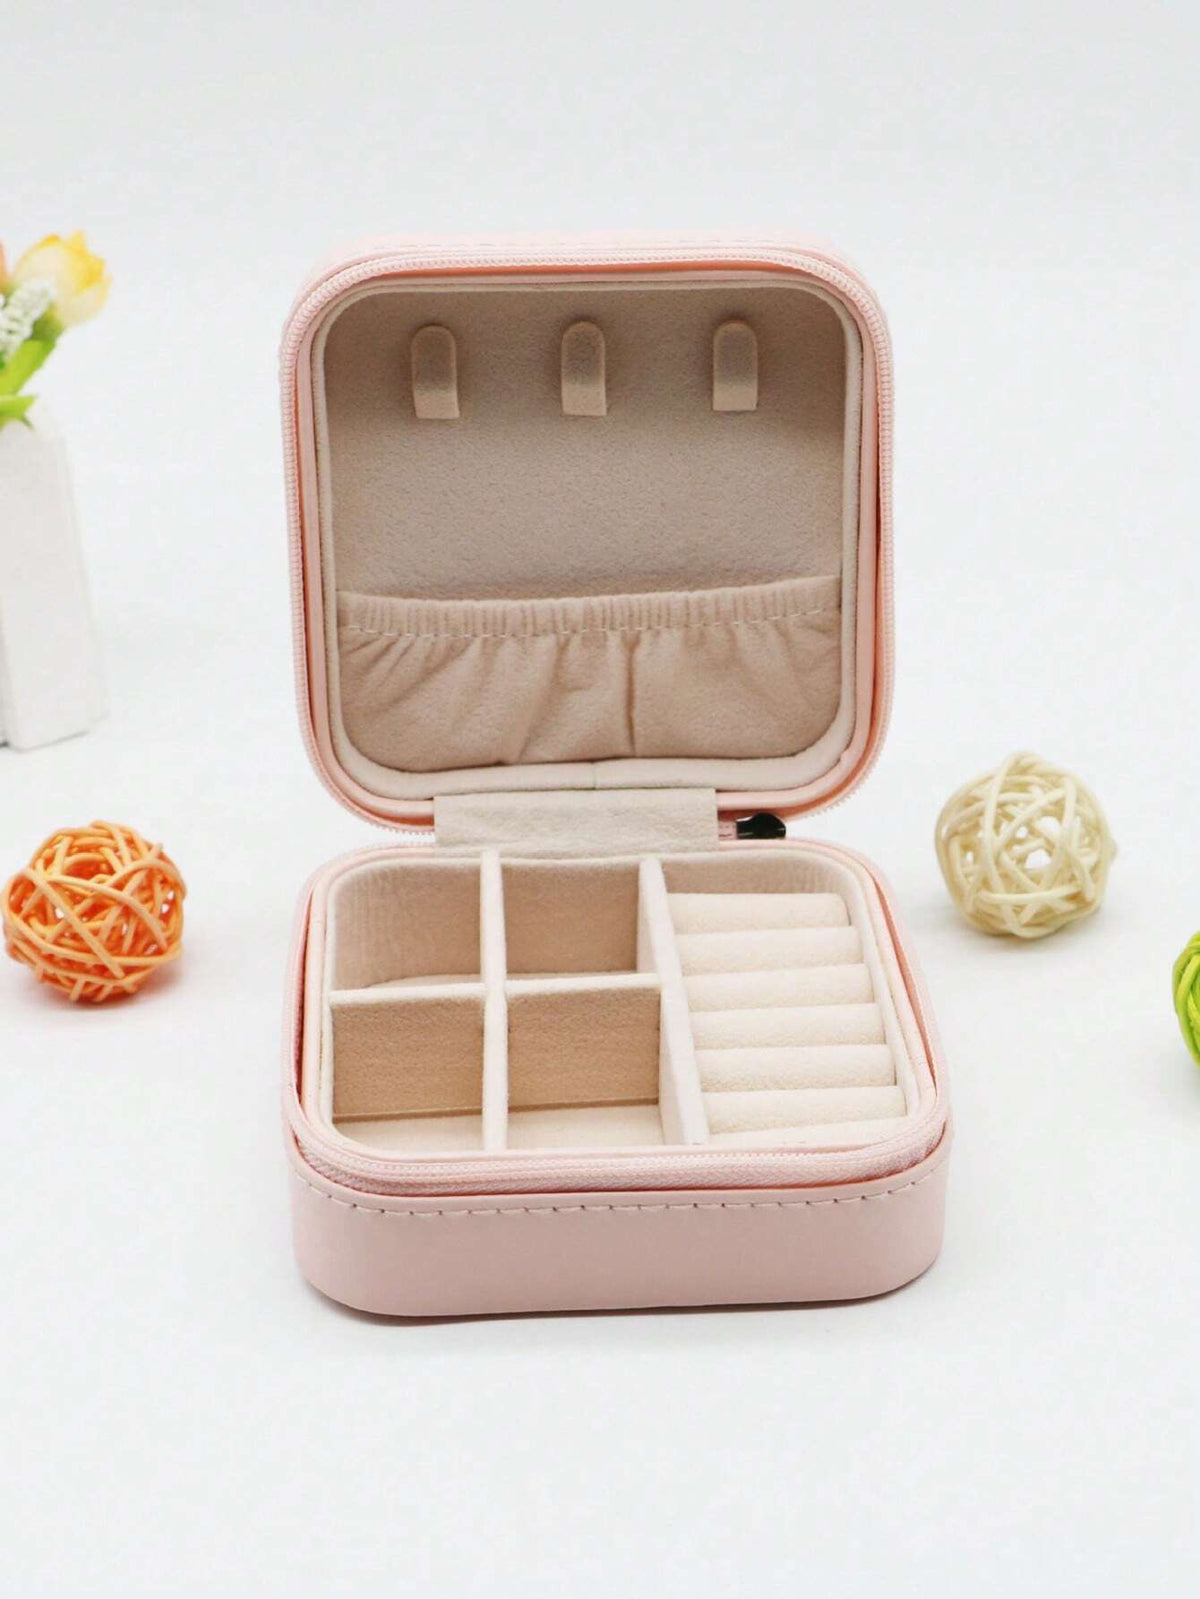 Jewelry Storage Box Leather Jewelry Stand Earrings Ring Box Cosmetics Beauty Container Organizer ( Random Color )